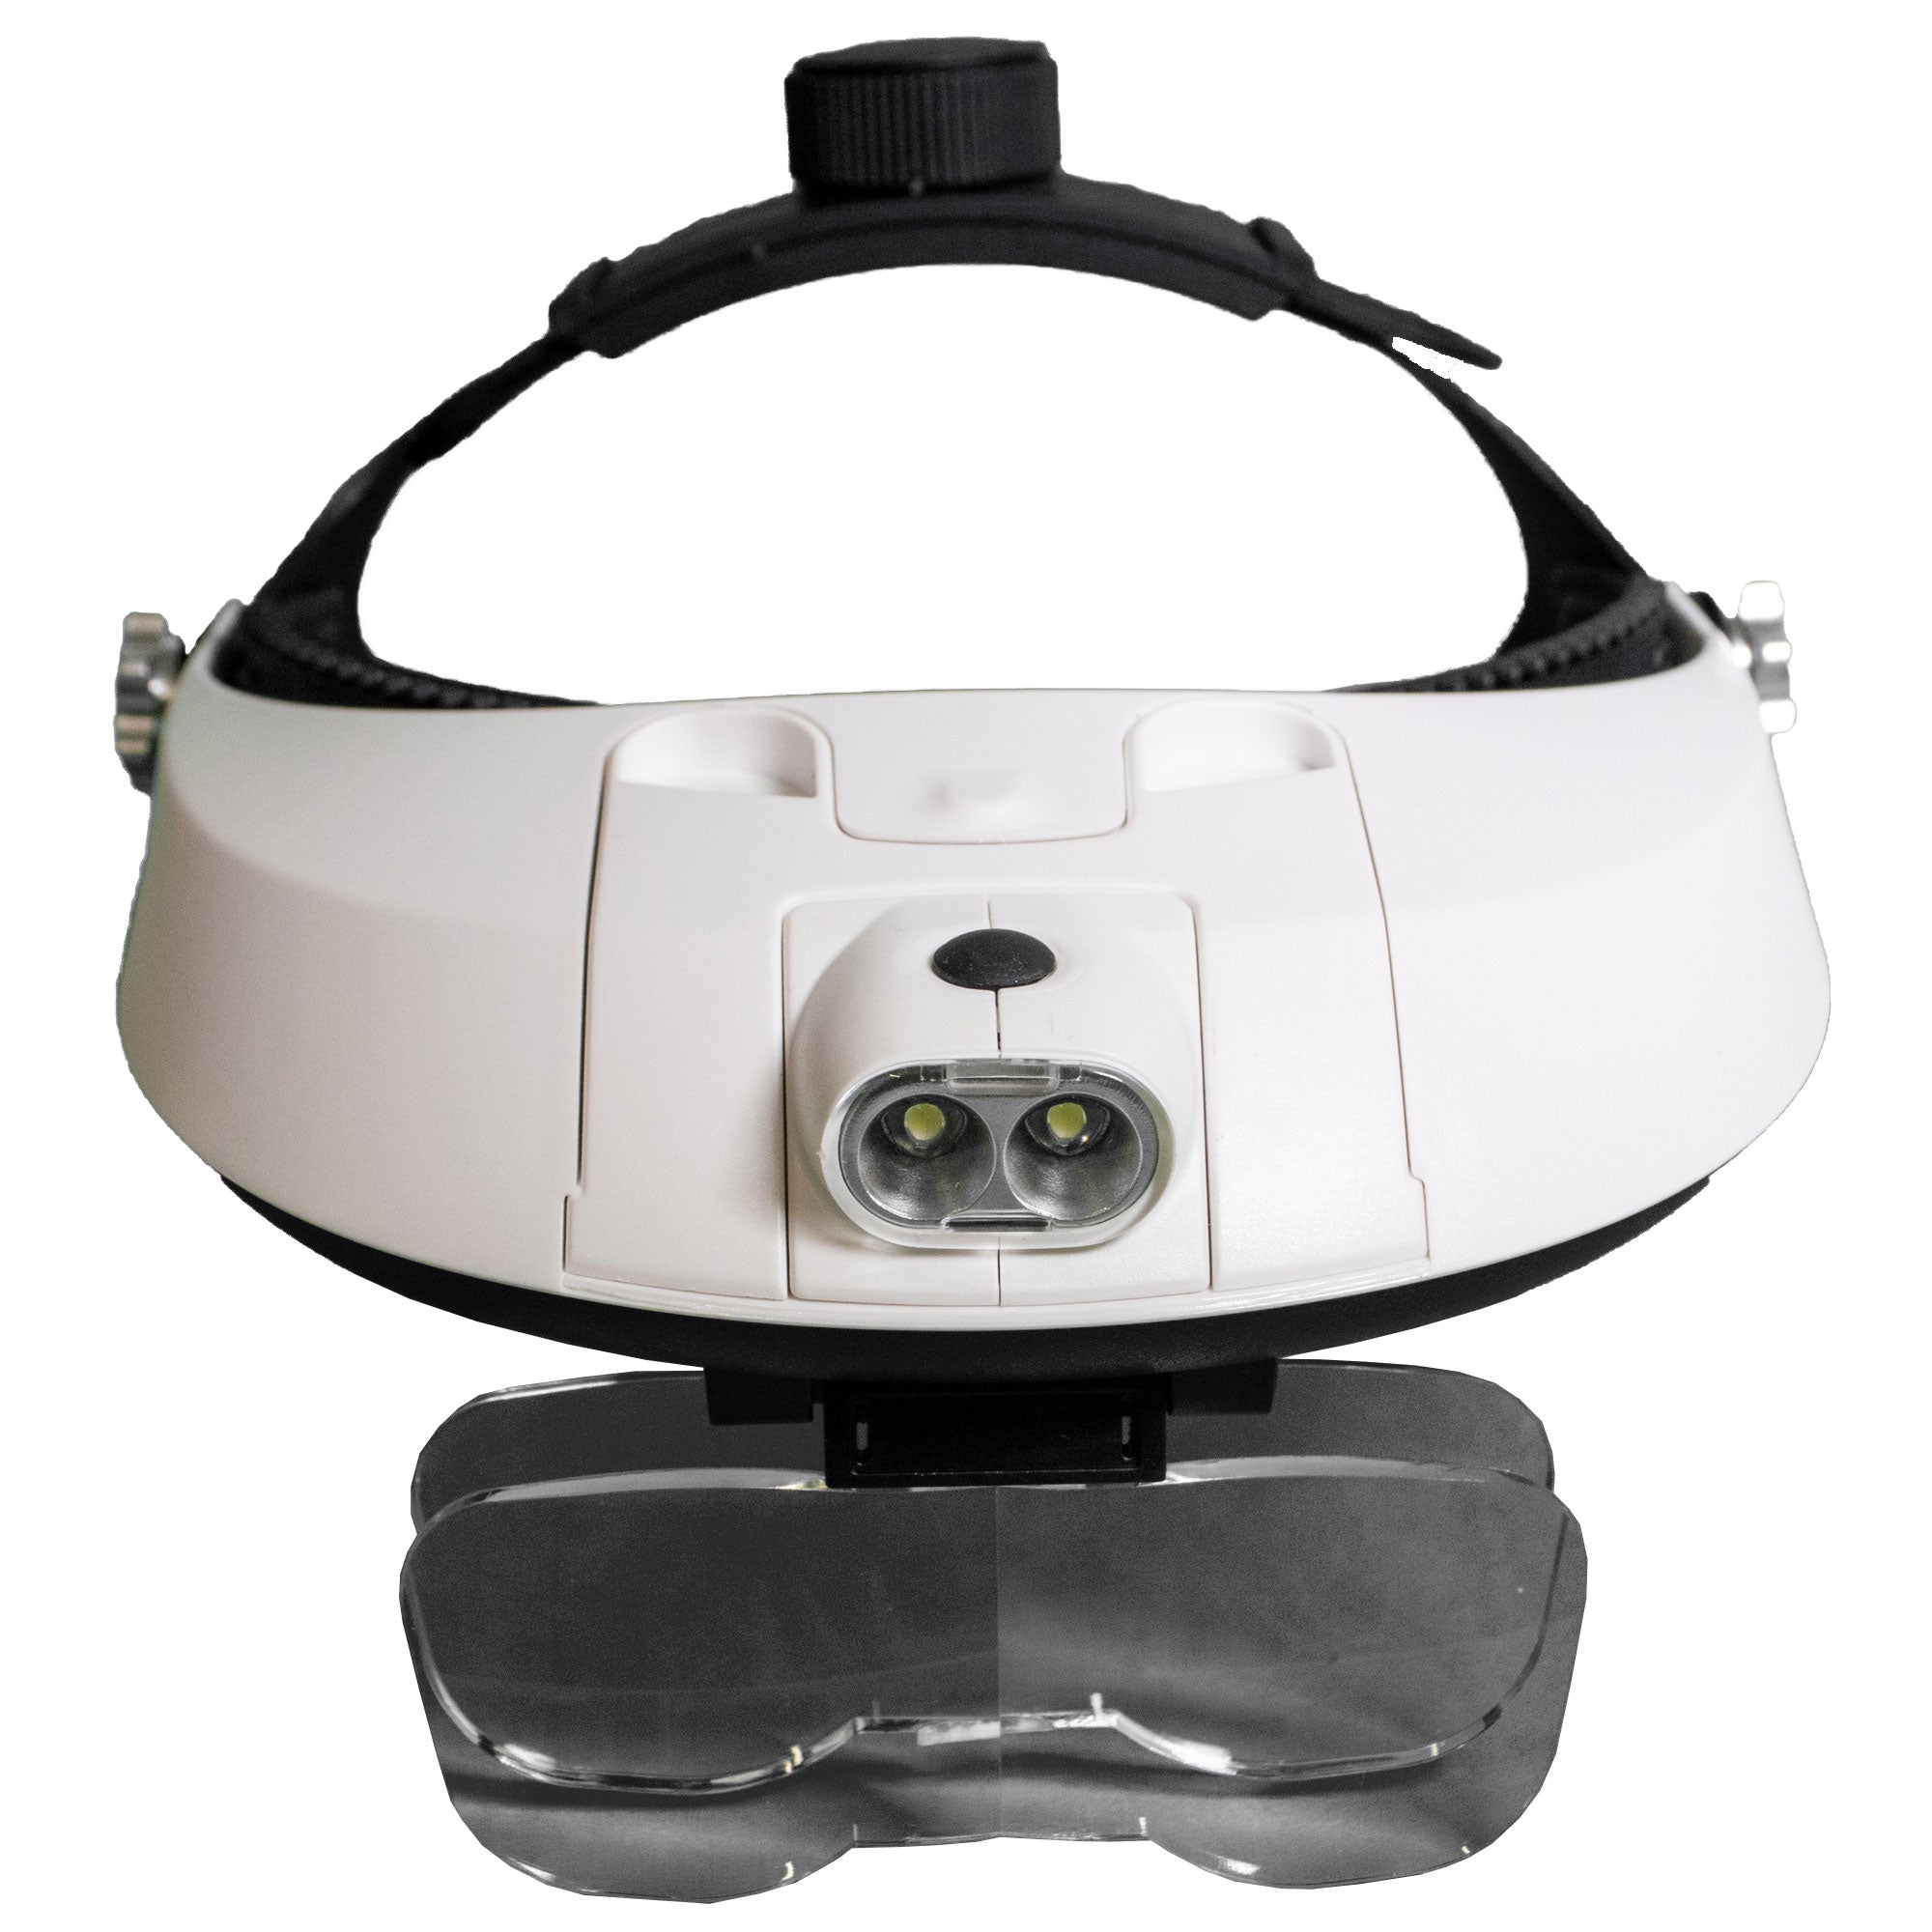 Binocular headband magnifier, 5 lenses can be used singly or in pairs. Also an LED light.